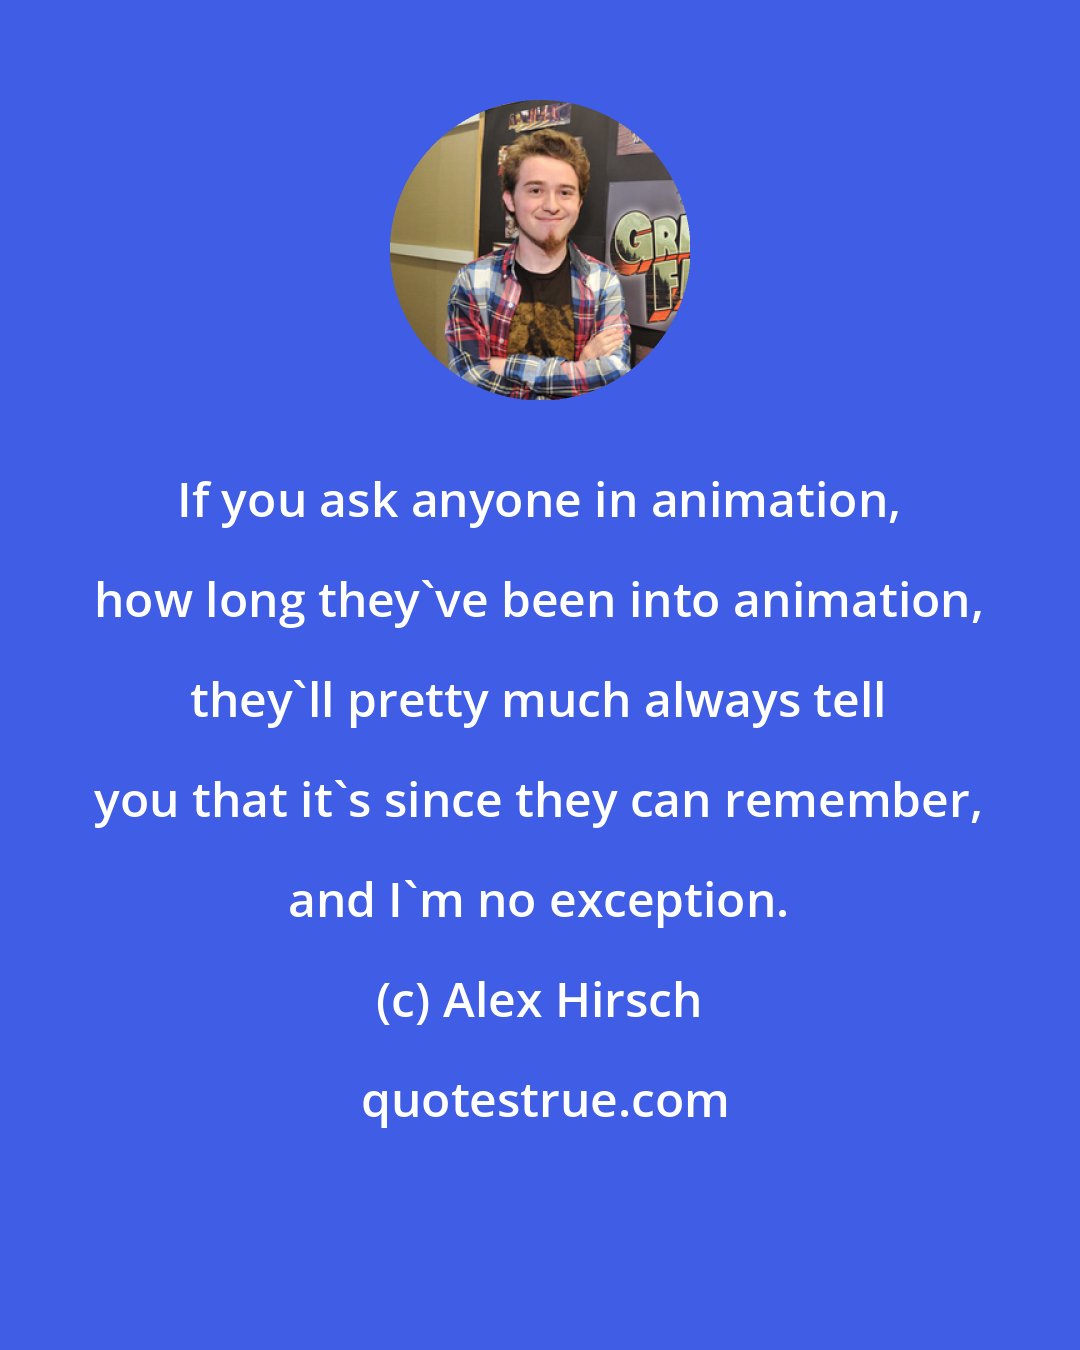 Alex Hirsch: If you ask anyone in animation, how long they've been into animation, they'll pretty much always tell you that it's since they can remember, and I'm no exception.